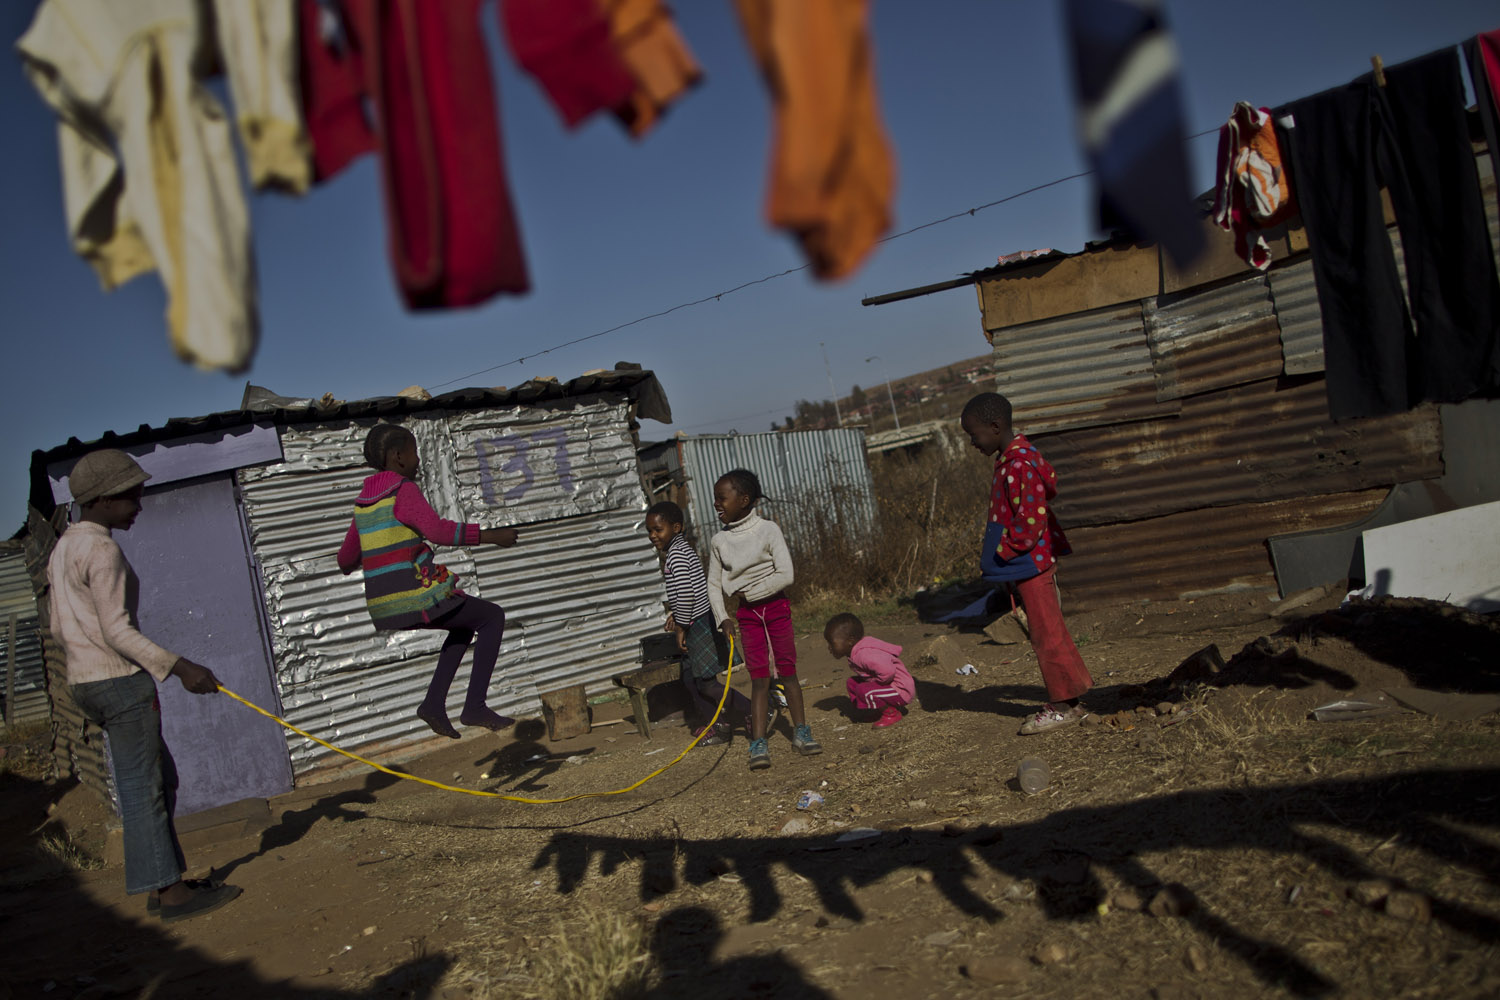 July 1, 2013. A group of South African girls enjoy skipping a rope in Soweto township, on the outskirts of Johannesburg, South Africa.